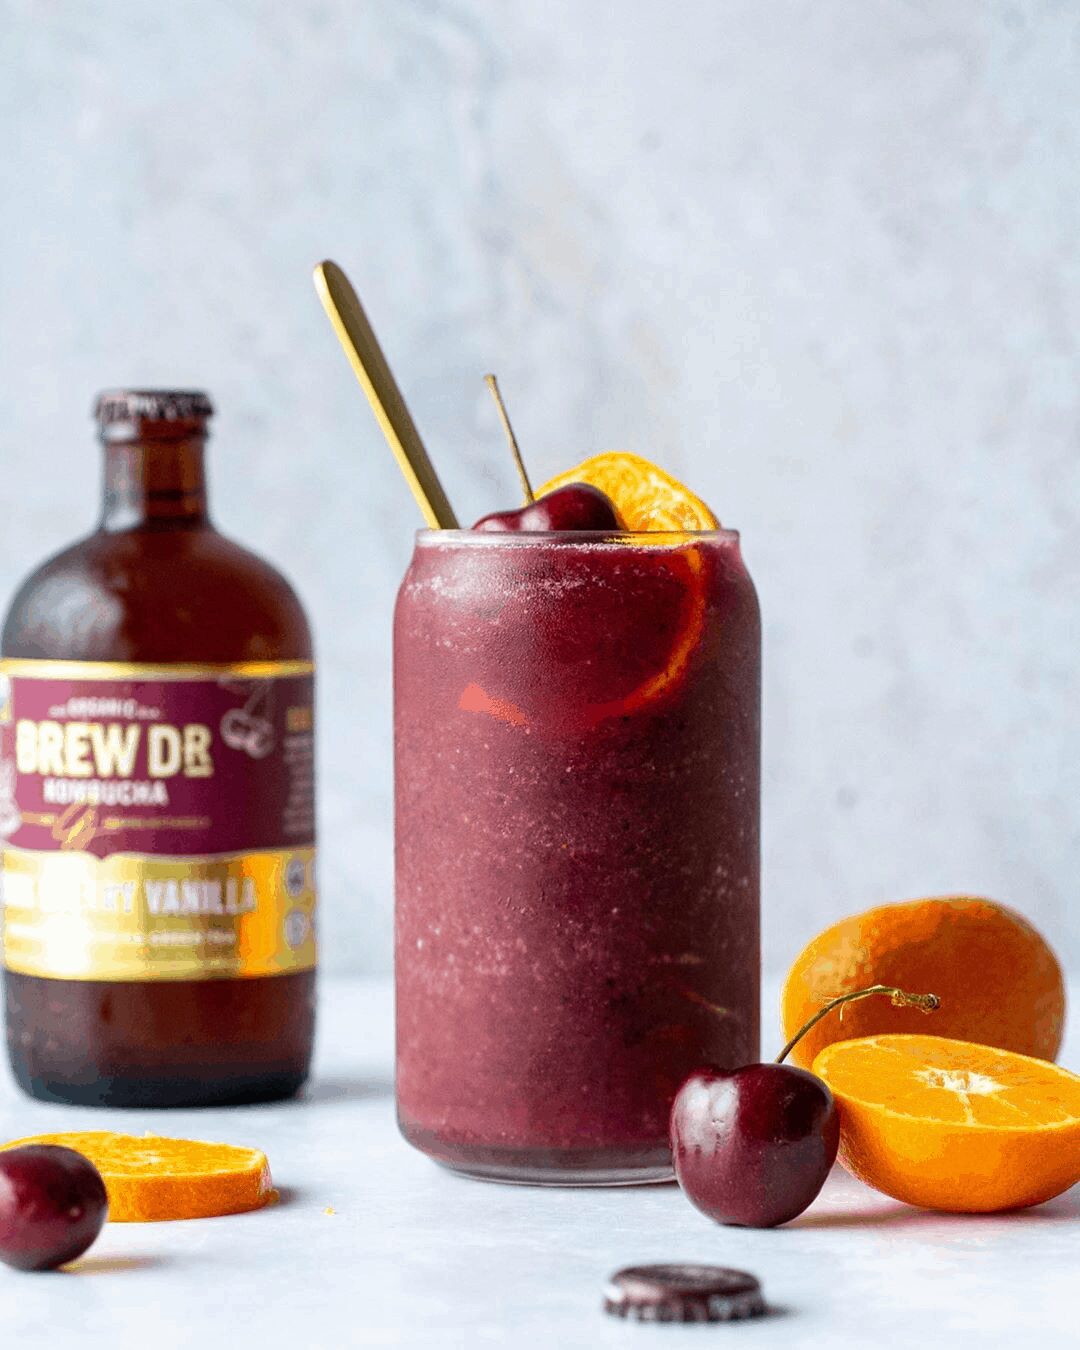 brewdr We're toasting to the end of summer with this mouthwatering kombucha slushie by @nyssas_kitchen! 🍒⁠⠀ ⁠⠀ 1 cup frozen mixed berries ⁠⠀ 4 ice cubes ⁠⠀ Juice of 1 tangerine ⁠⠀ 1 cup of @brewdr kombucha Dark Cherry Vanilla ⁠⠀ ⁠⠀ ⁠⠀ Blend everything together, starting on a low speed and gradually increasing until smooth. Pour into a glass and garnish with some extra fruit. Enjoy!!⁠⠀